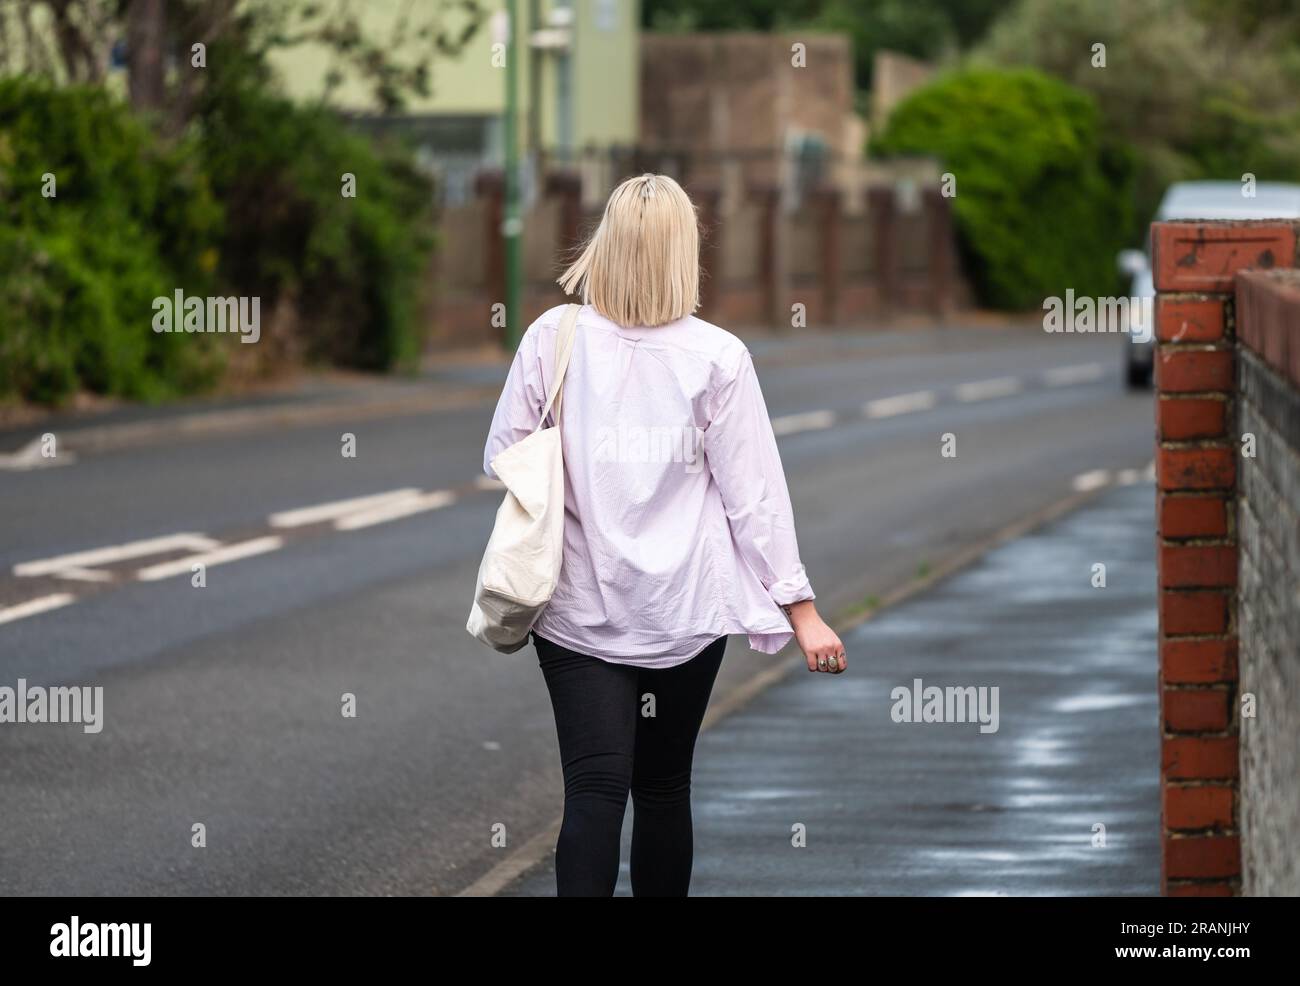 Rear of young classy lady with blonde hair, pink top and handbag walking away along a pavement in the UK. Stock Photo